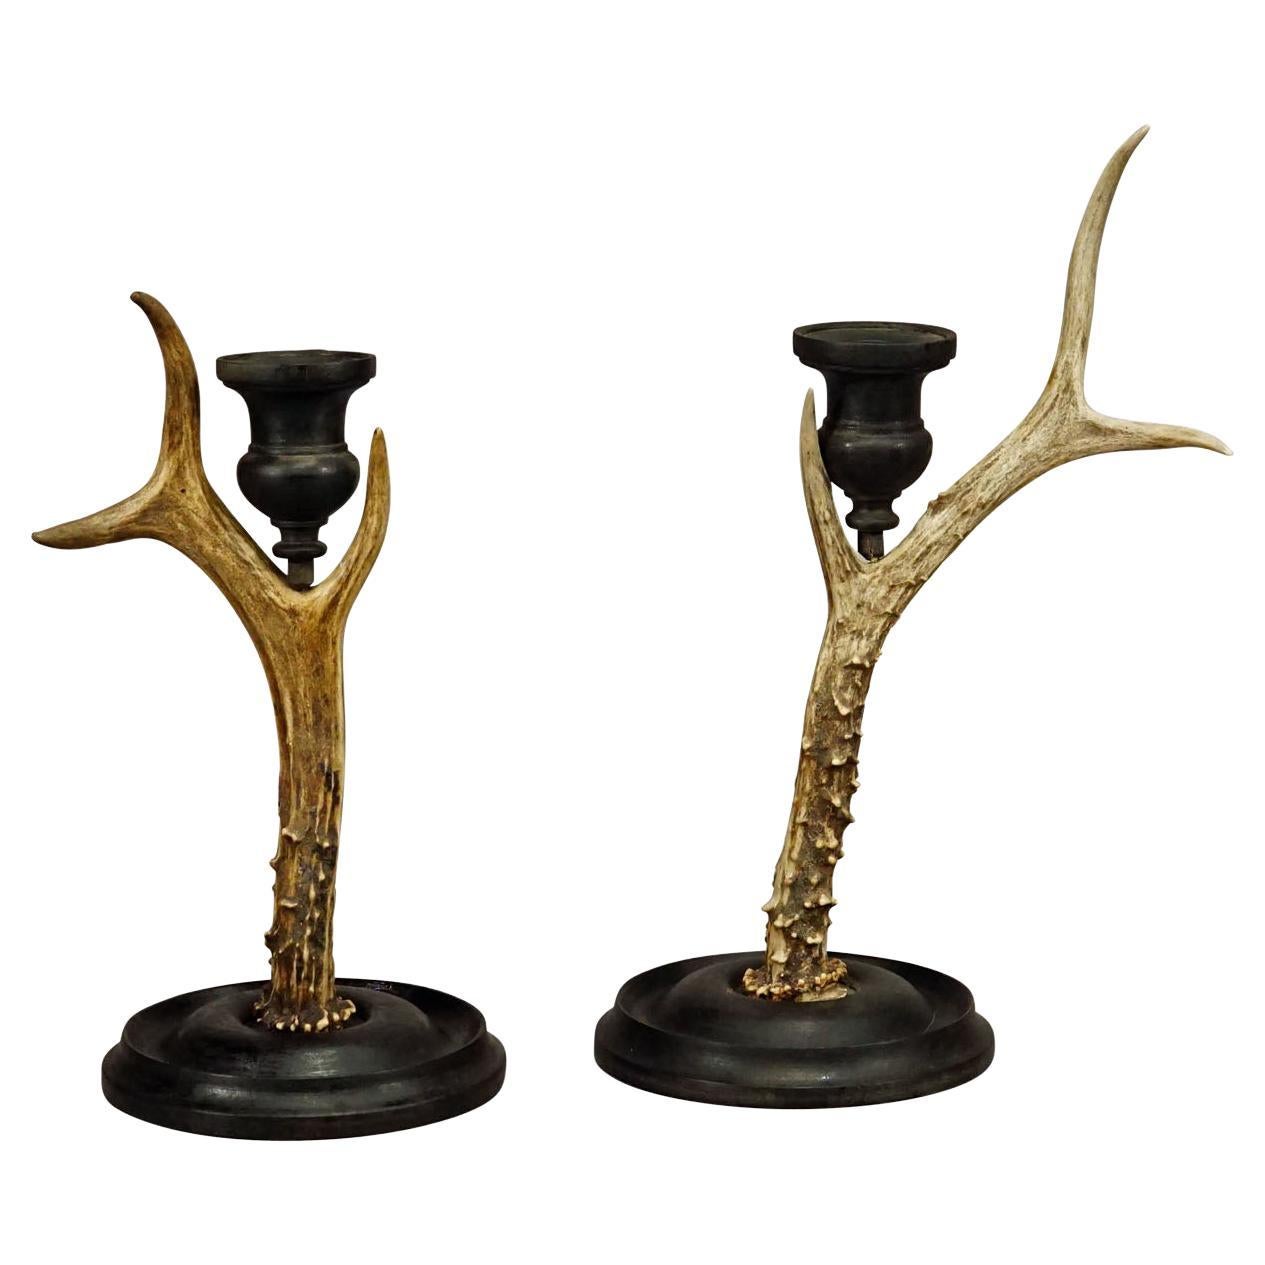 A Pair Vintage Black Forest Candle Holders with Wooden Base and Spout ca. 1930